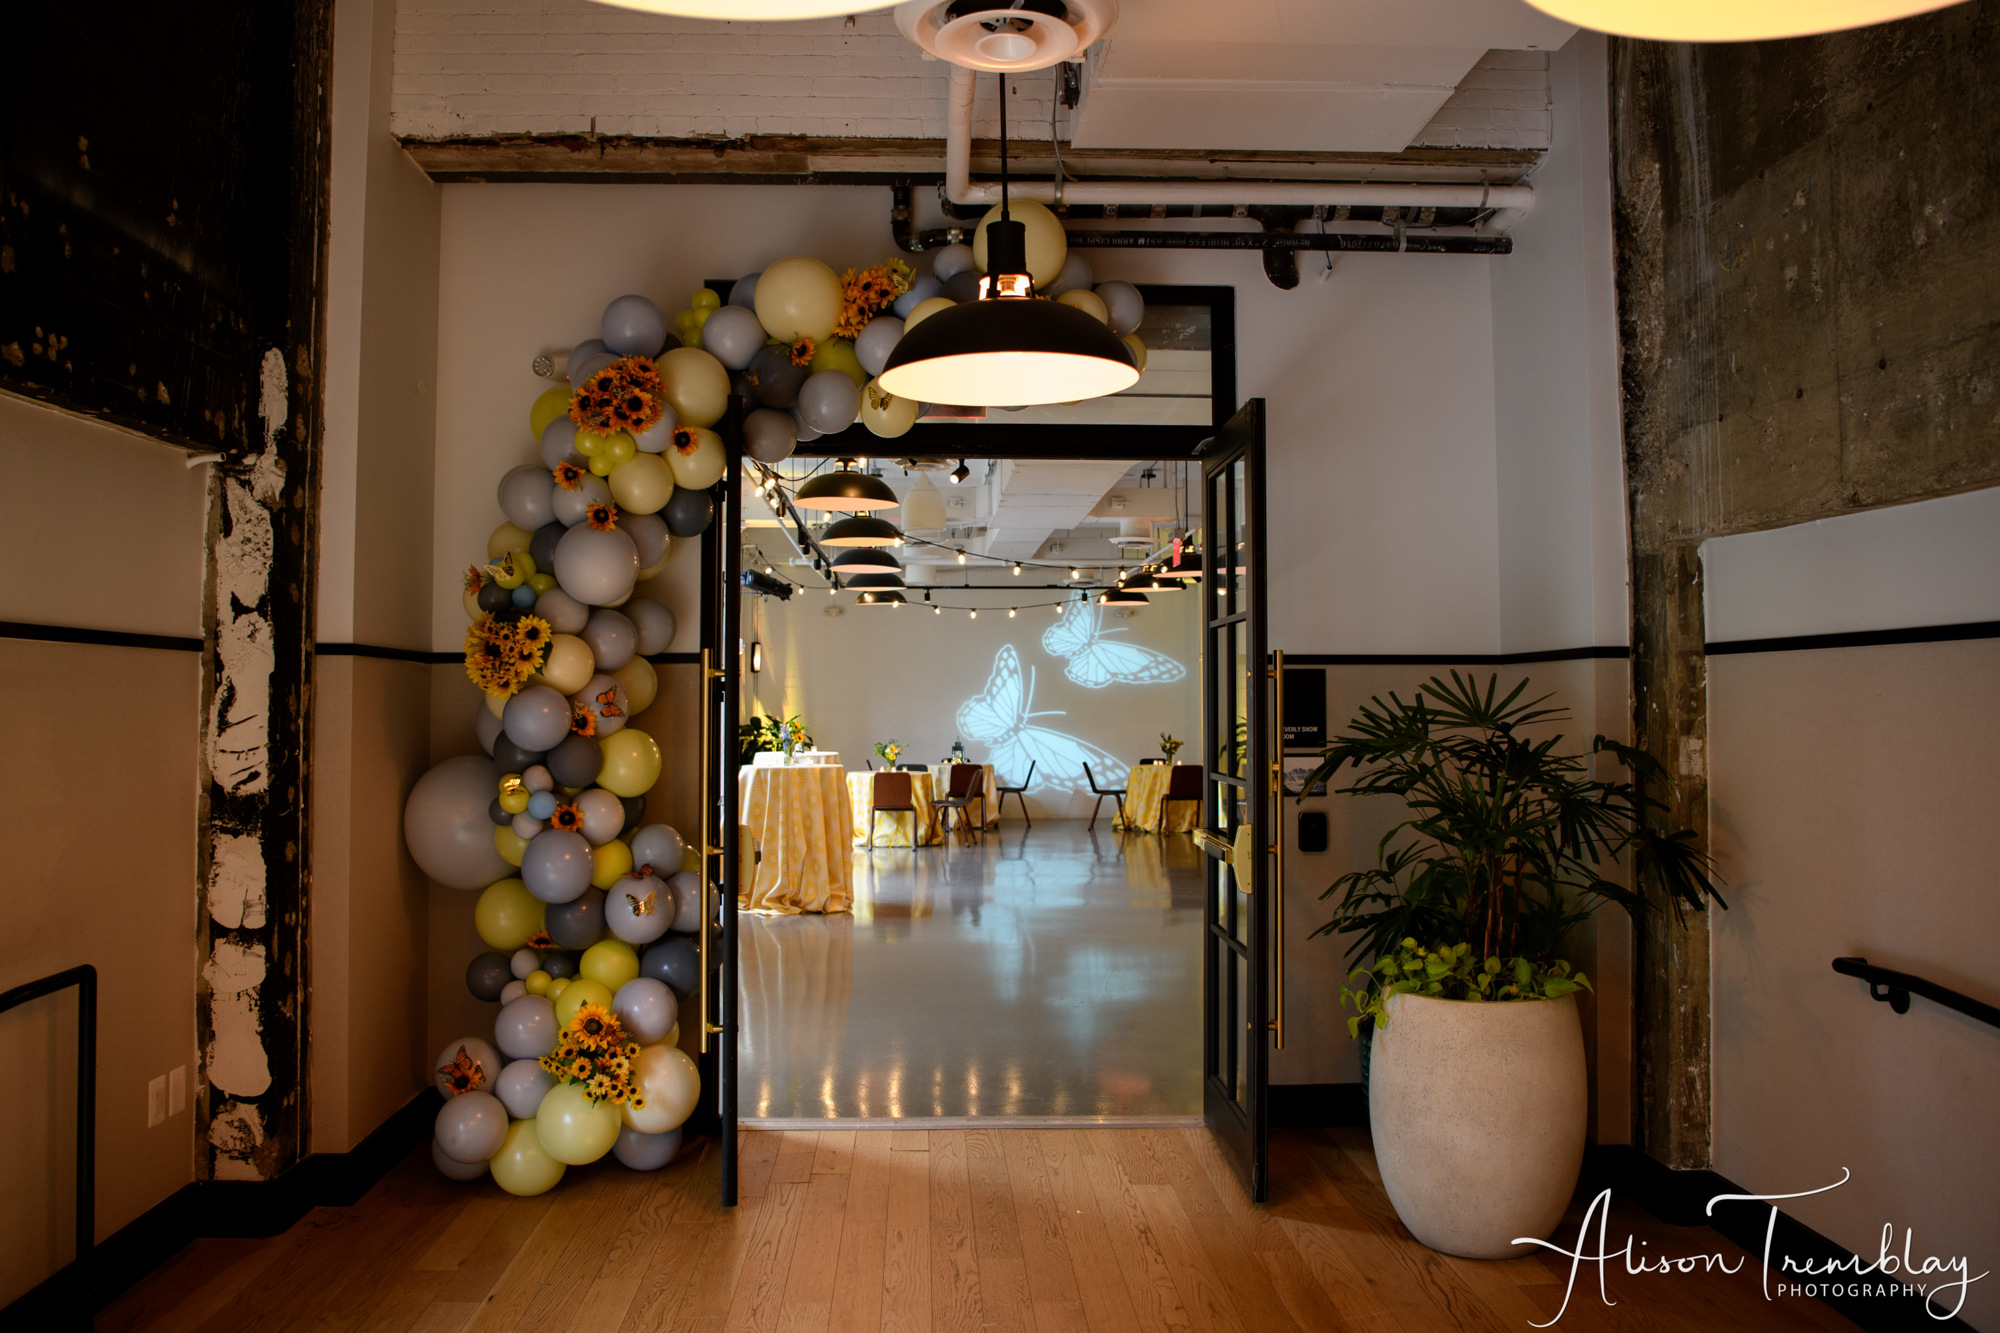 A balloon arch accented with sunflowers and butterflies at Charlotte's Sunflower and Butterfly Bat Mitzvah Party at Eaton In Washington, DC | Pop Color Events | Adding a Pop of Color to Bar & Bat Mitzvahs in DC, MD & VA | Photo by: Alison Tremblay